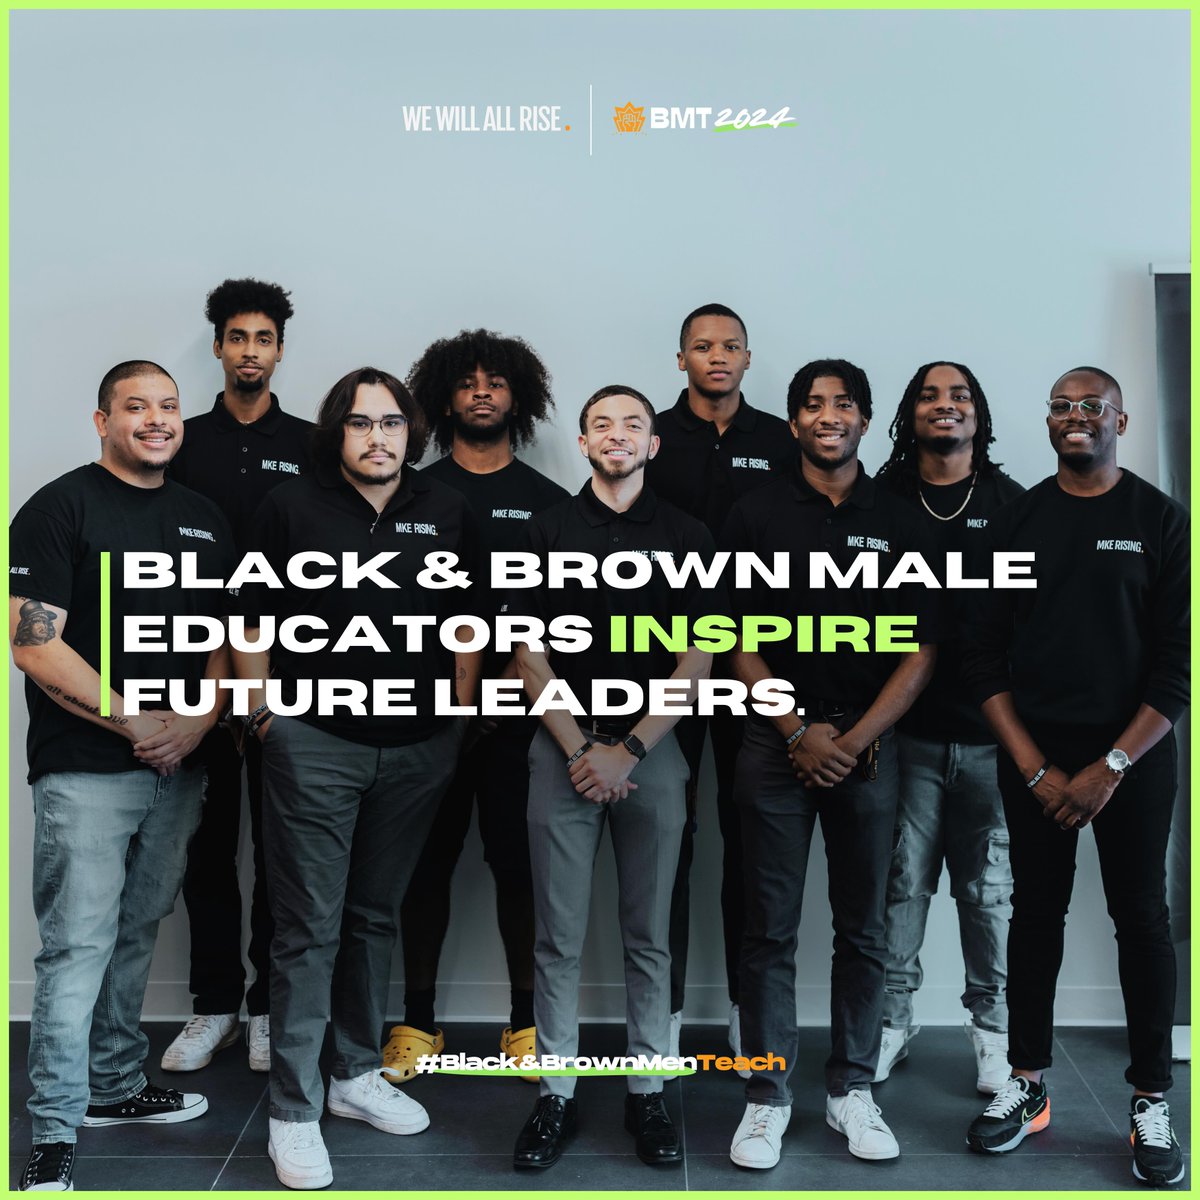 Support the @WeWillAllRise #BMT2024 campaign working to uplift male educators of color by resharing a 'Black and Brown Men Teach' post with your network. bit.ly/4cIaopP